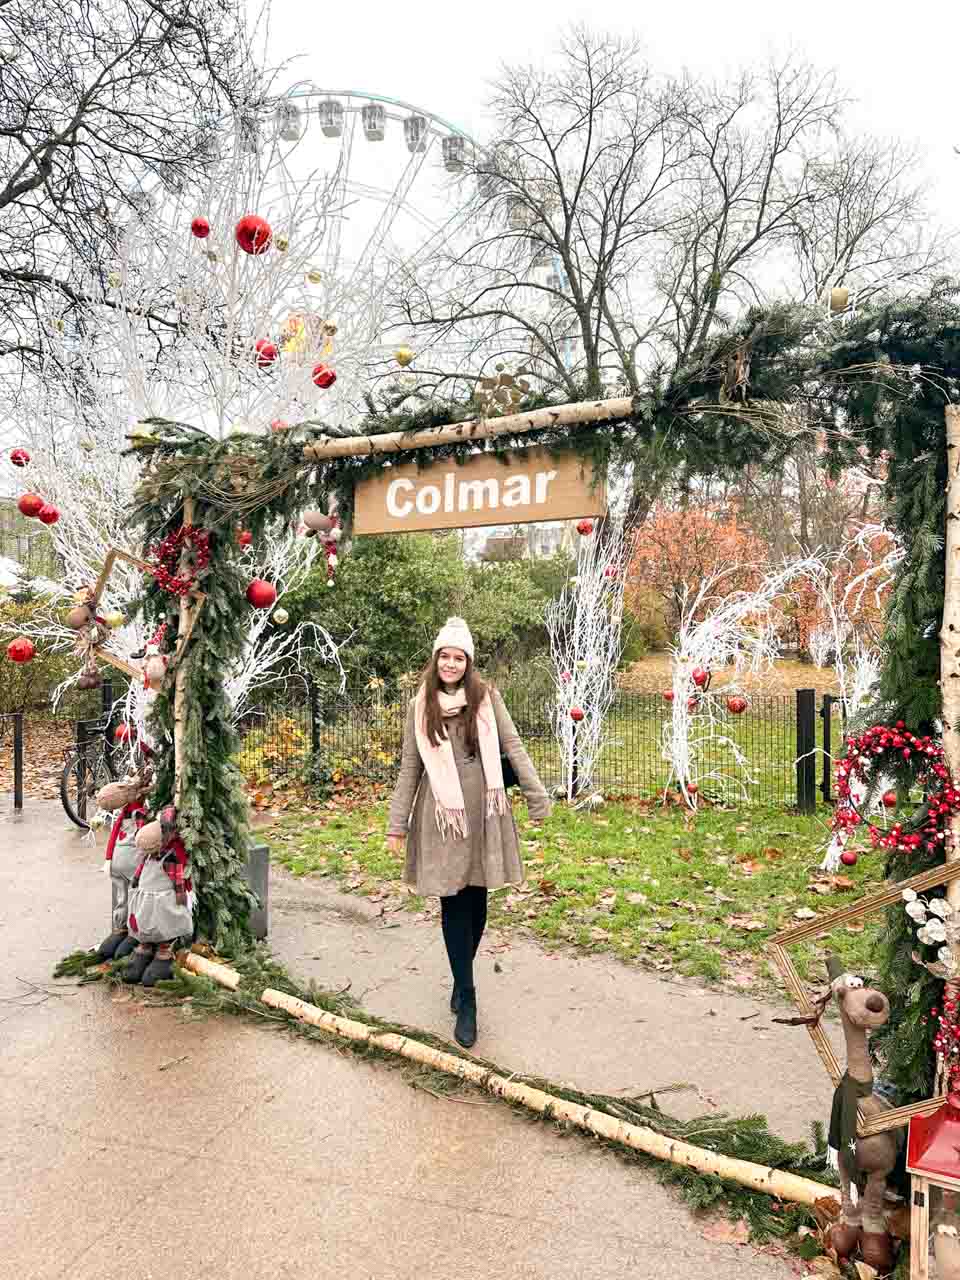 A smiling woman walking through a festive archway labelled 'Colmar', with Christmas decorations and a Ferris wheel in the background